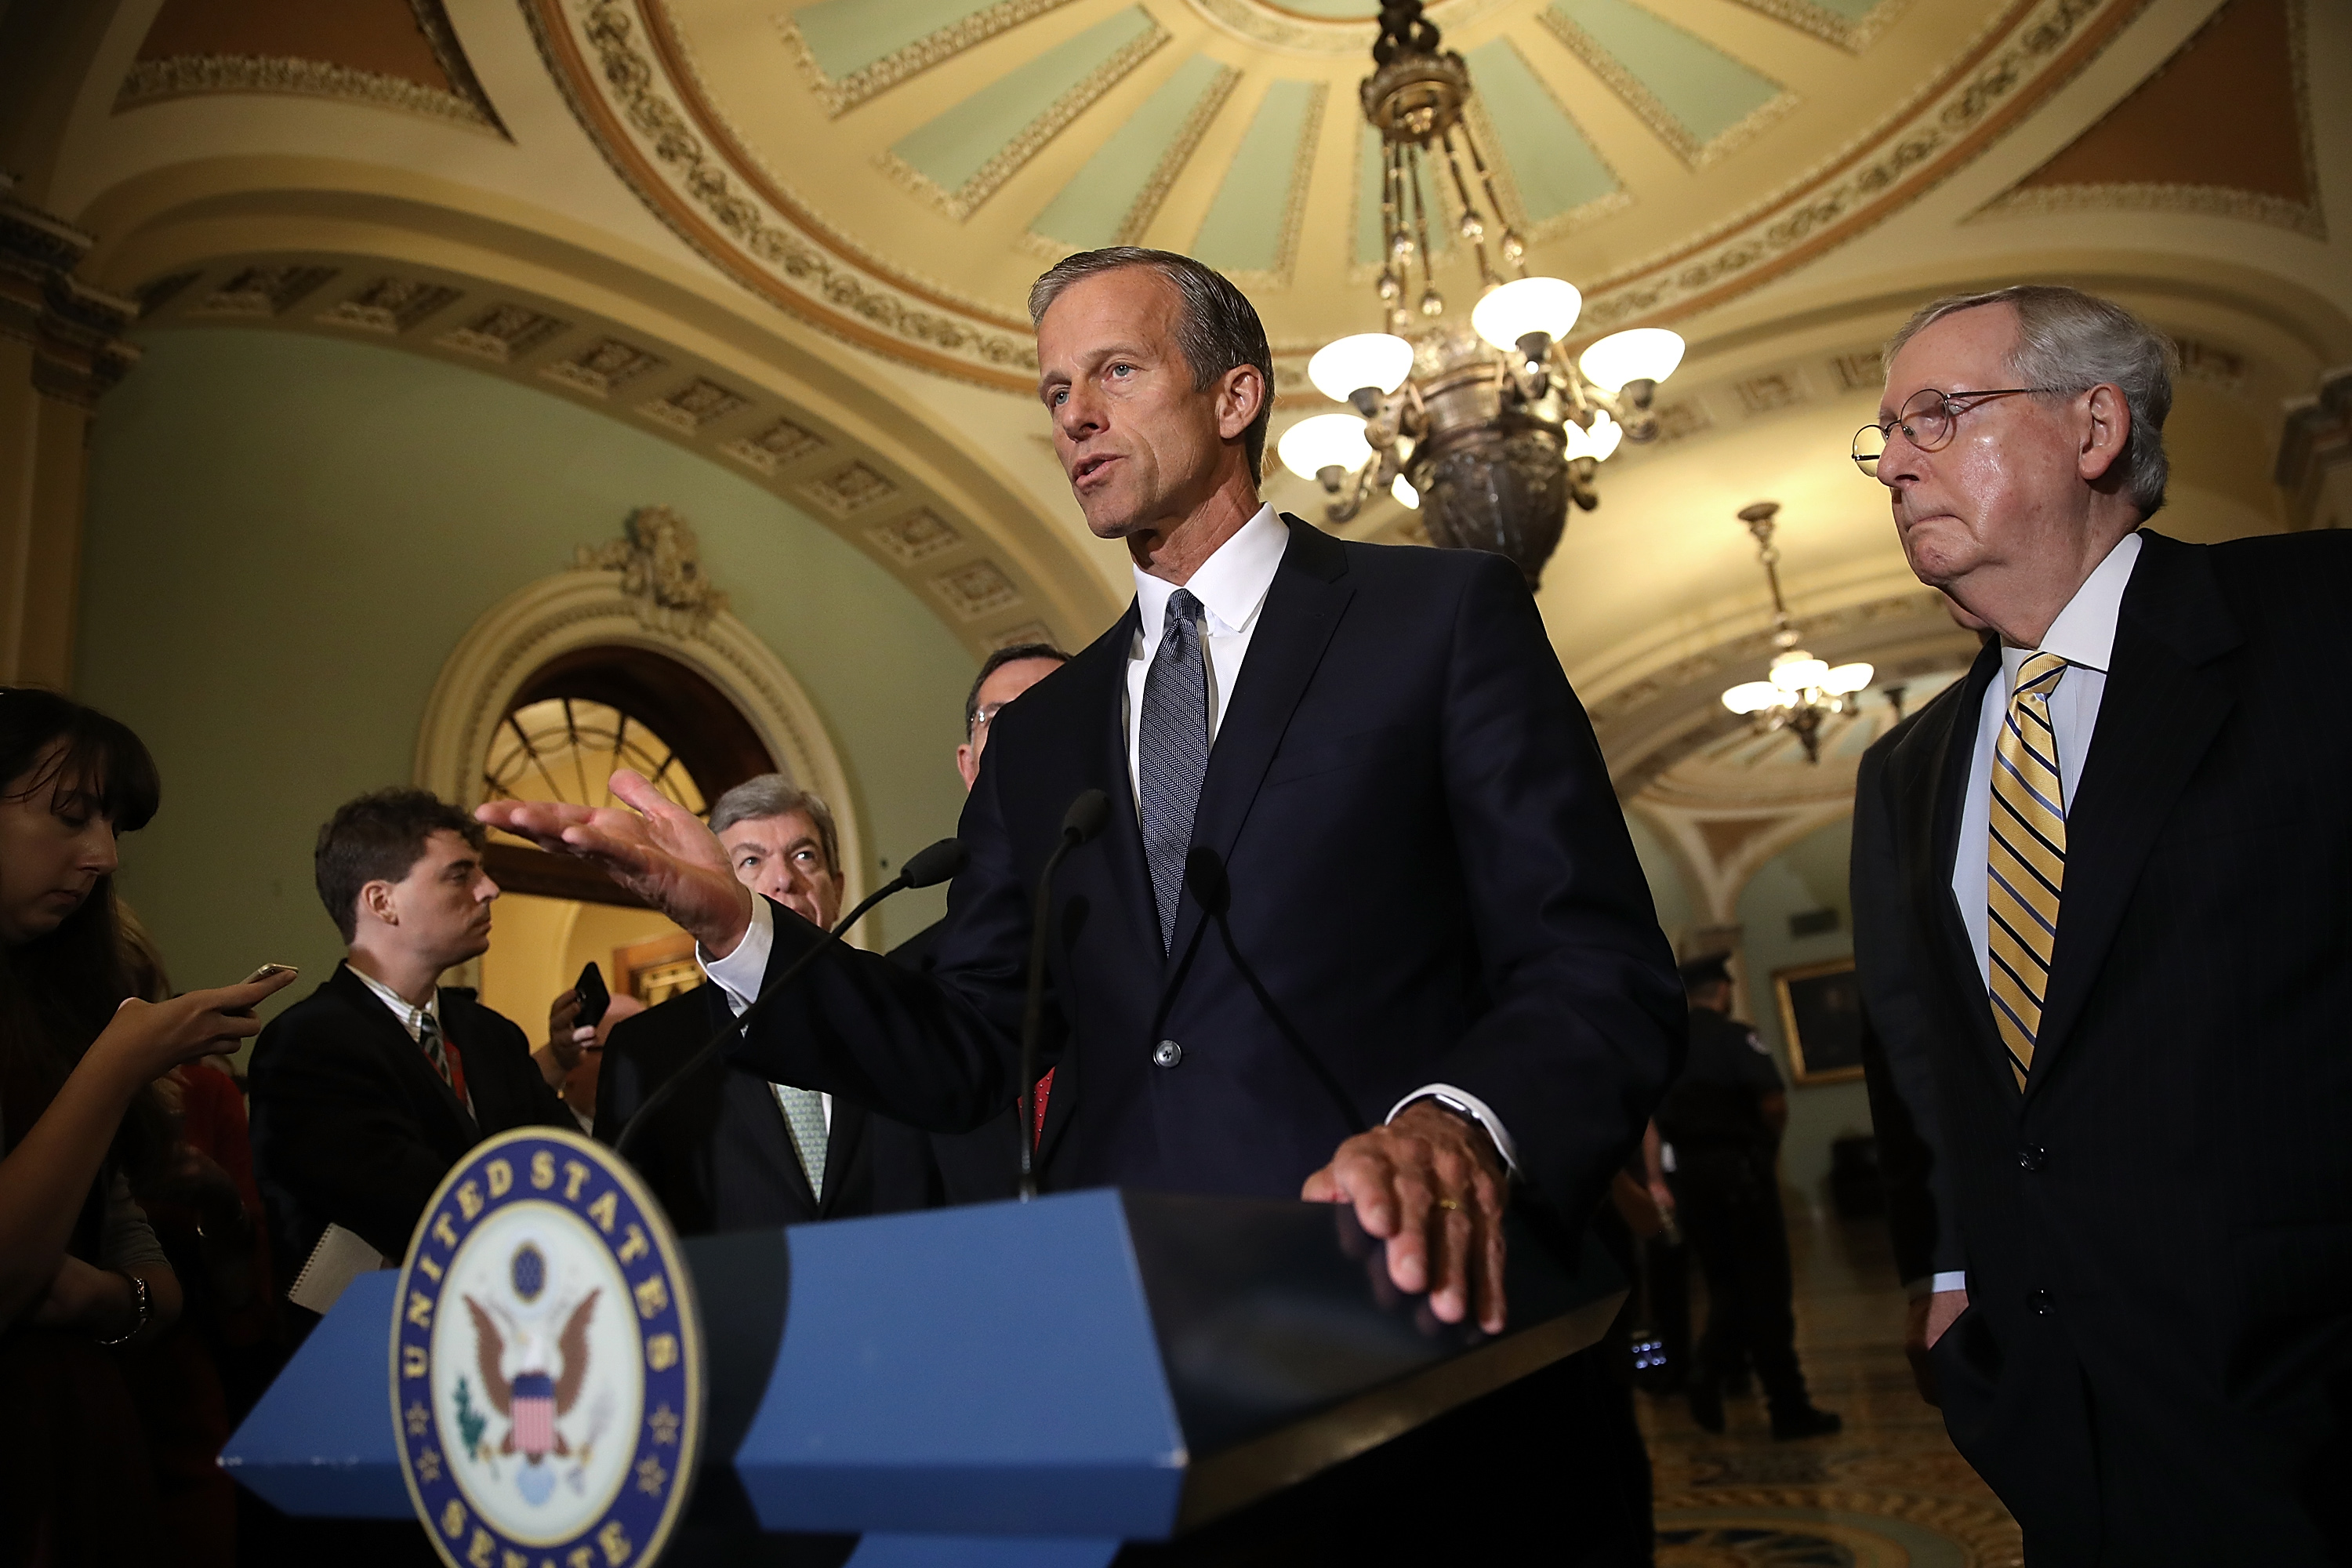 Sen. John Thune speaks with members of the Senate Republican leadership during a press conference at the U.S. Capitol on Sept. 12, 2017 in Washington, DC. During the press conference, Senate Majority Leader Mitch McConnell answered a range of questions relating to the upcoming Senate agenda. (Win McNamee—Getty Images)